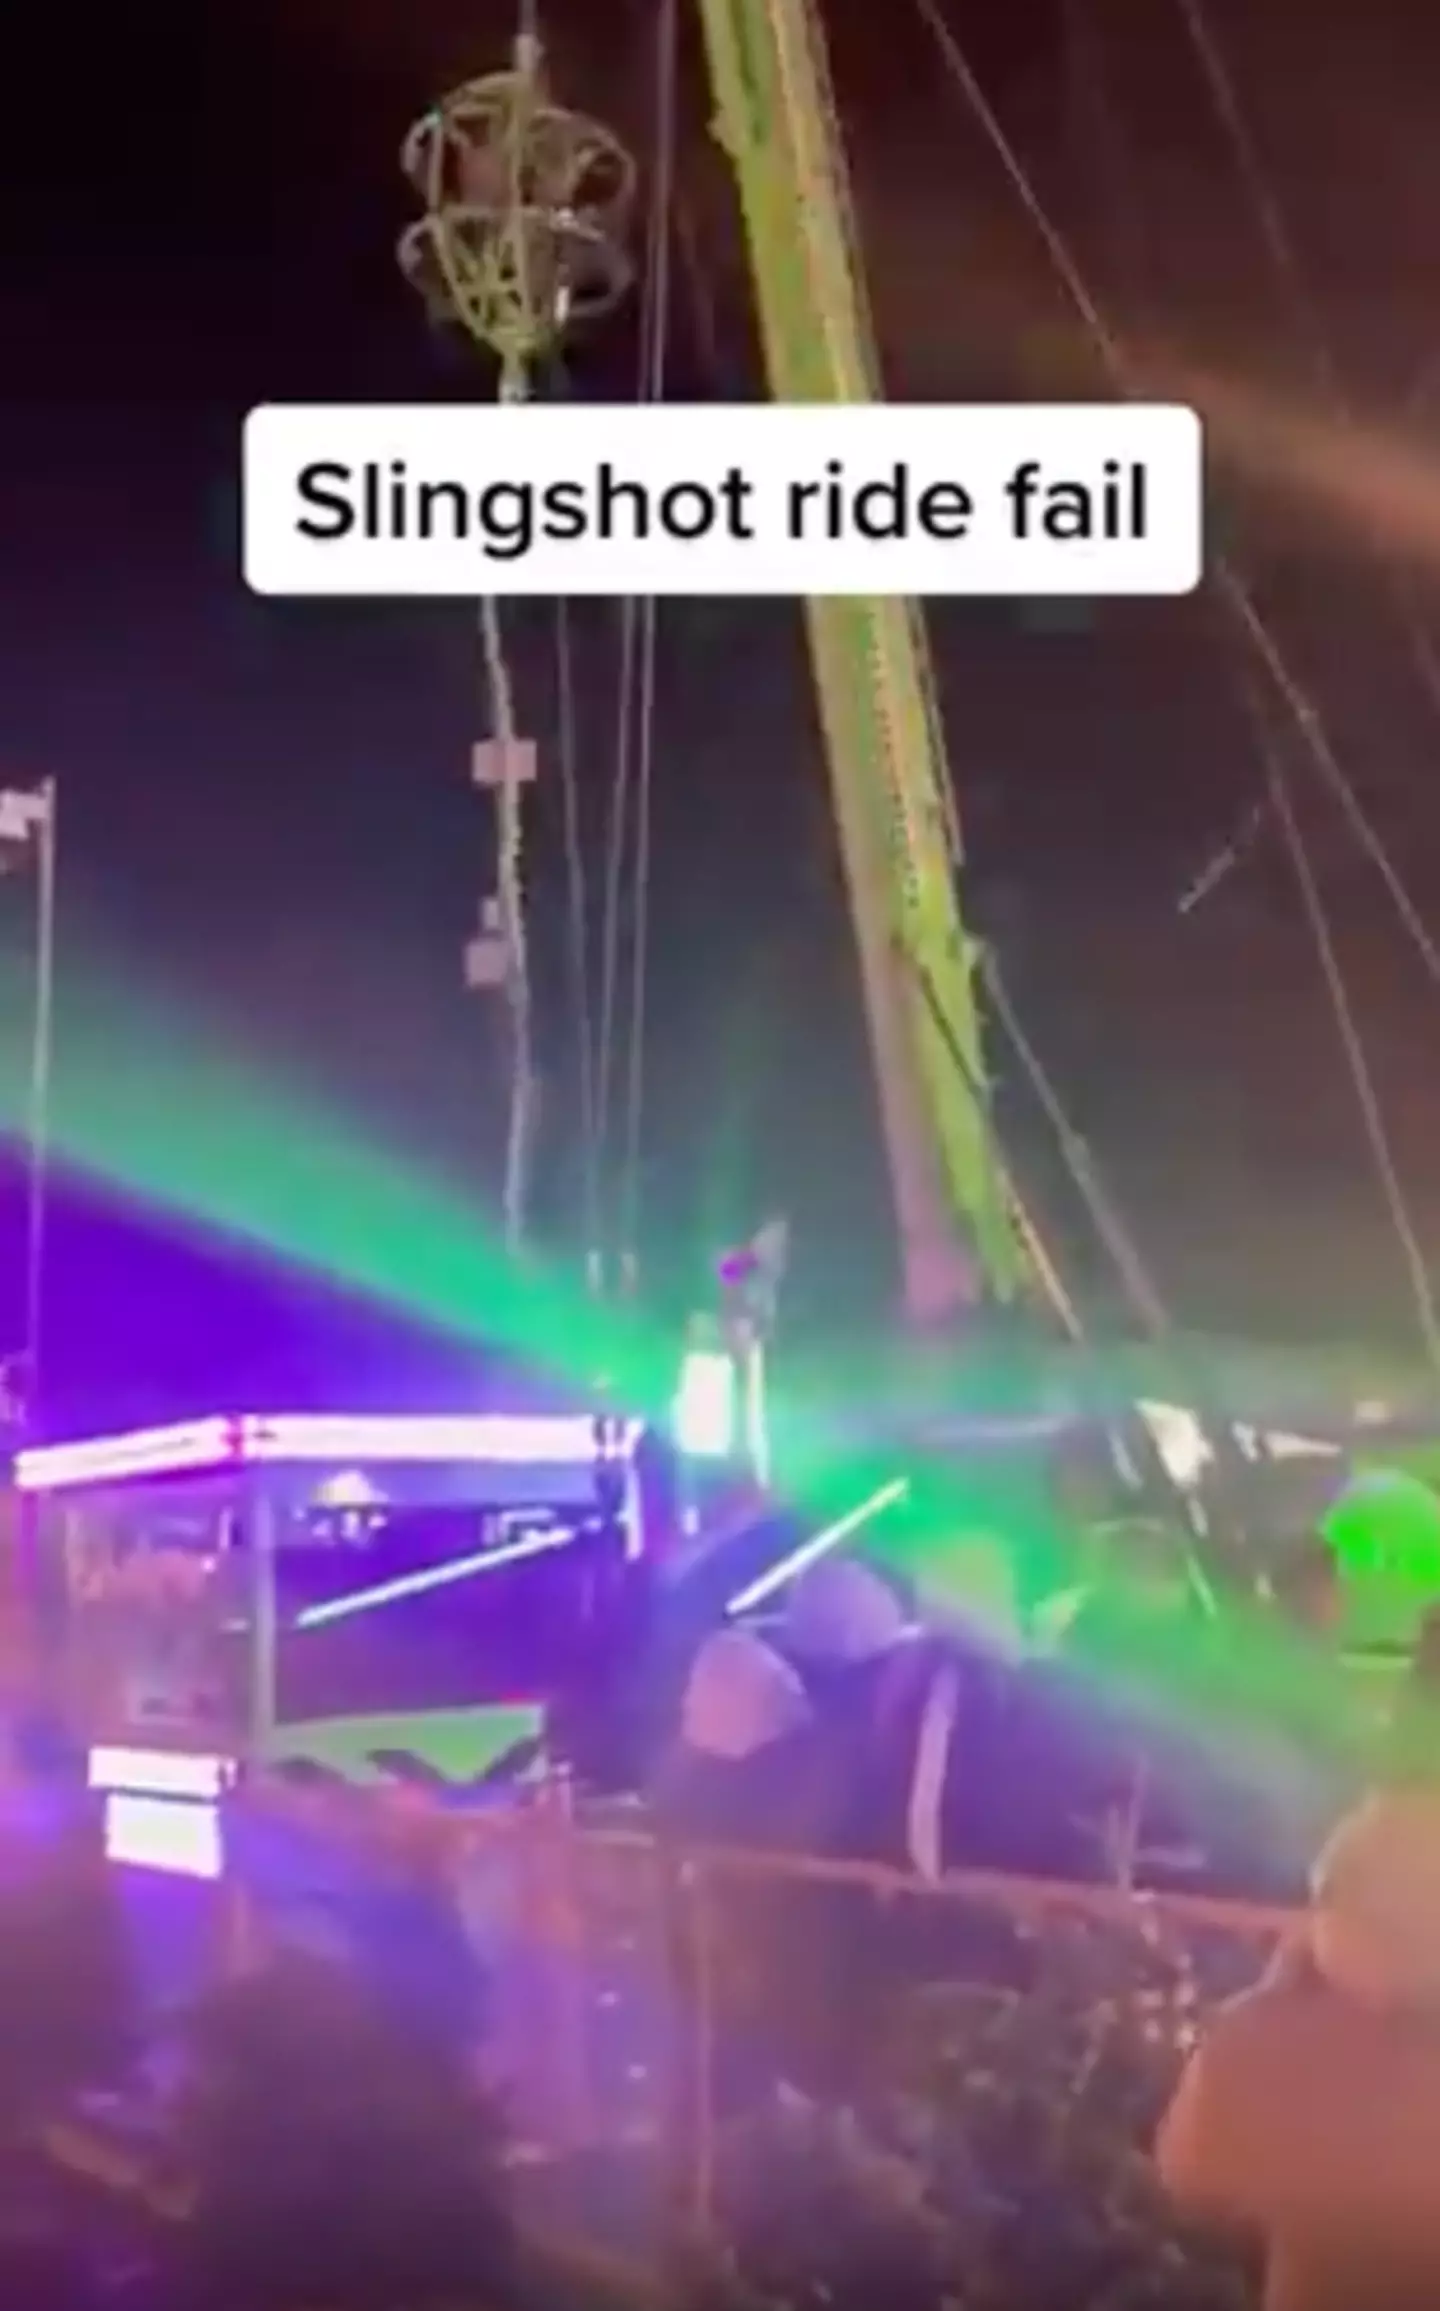 Neither of the people on the ride was injured.